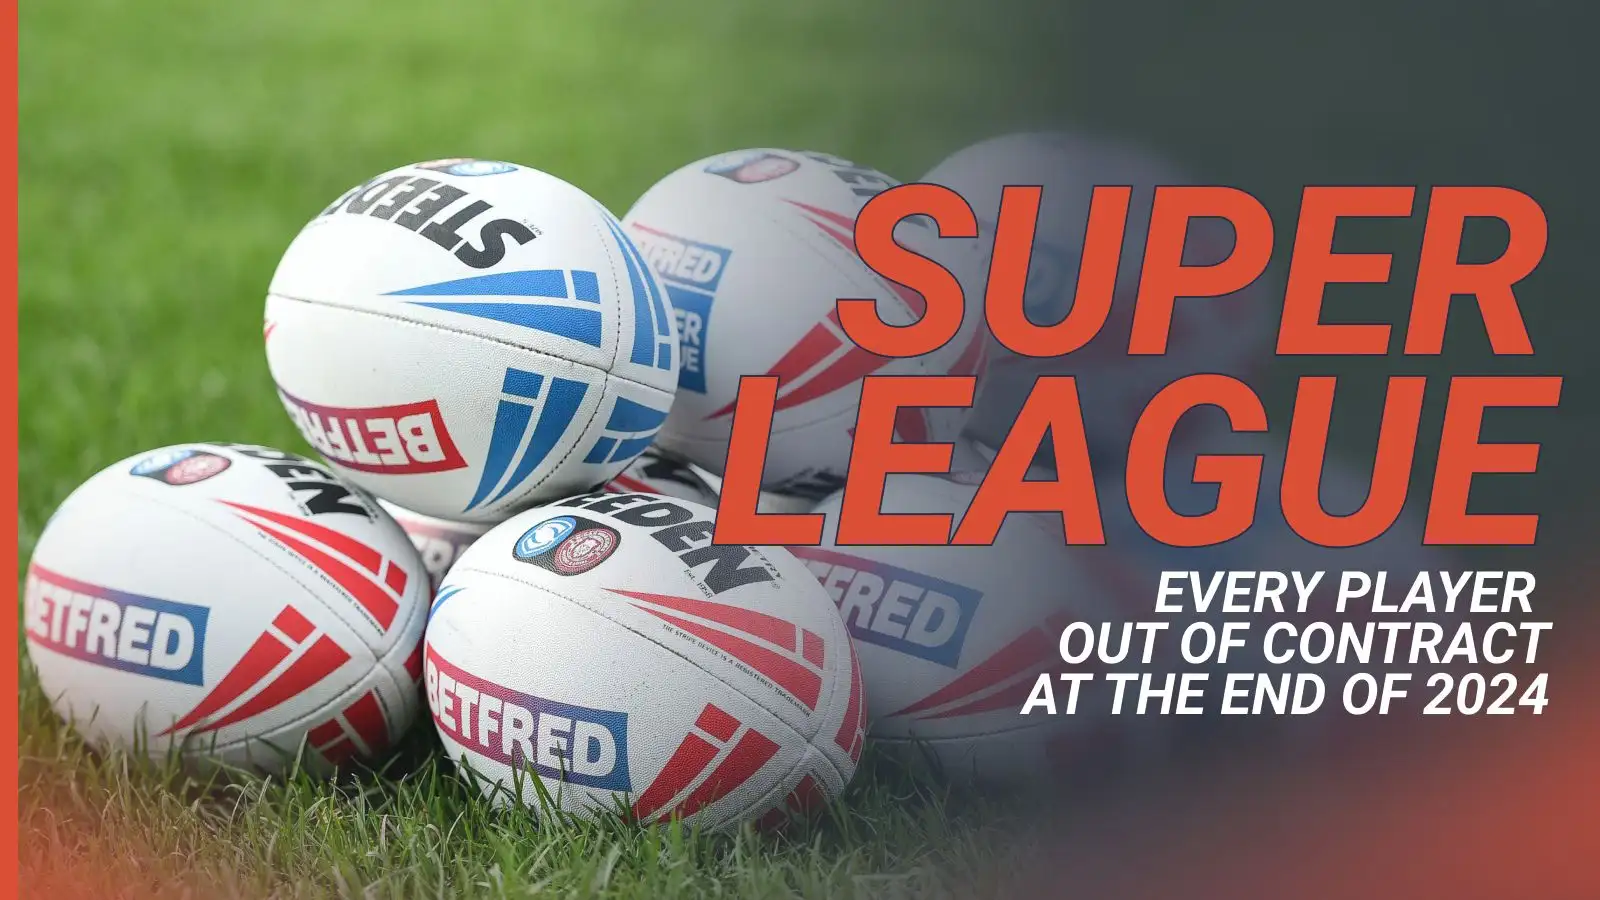 Every Super League player out of contract at the end of 2024